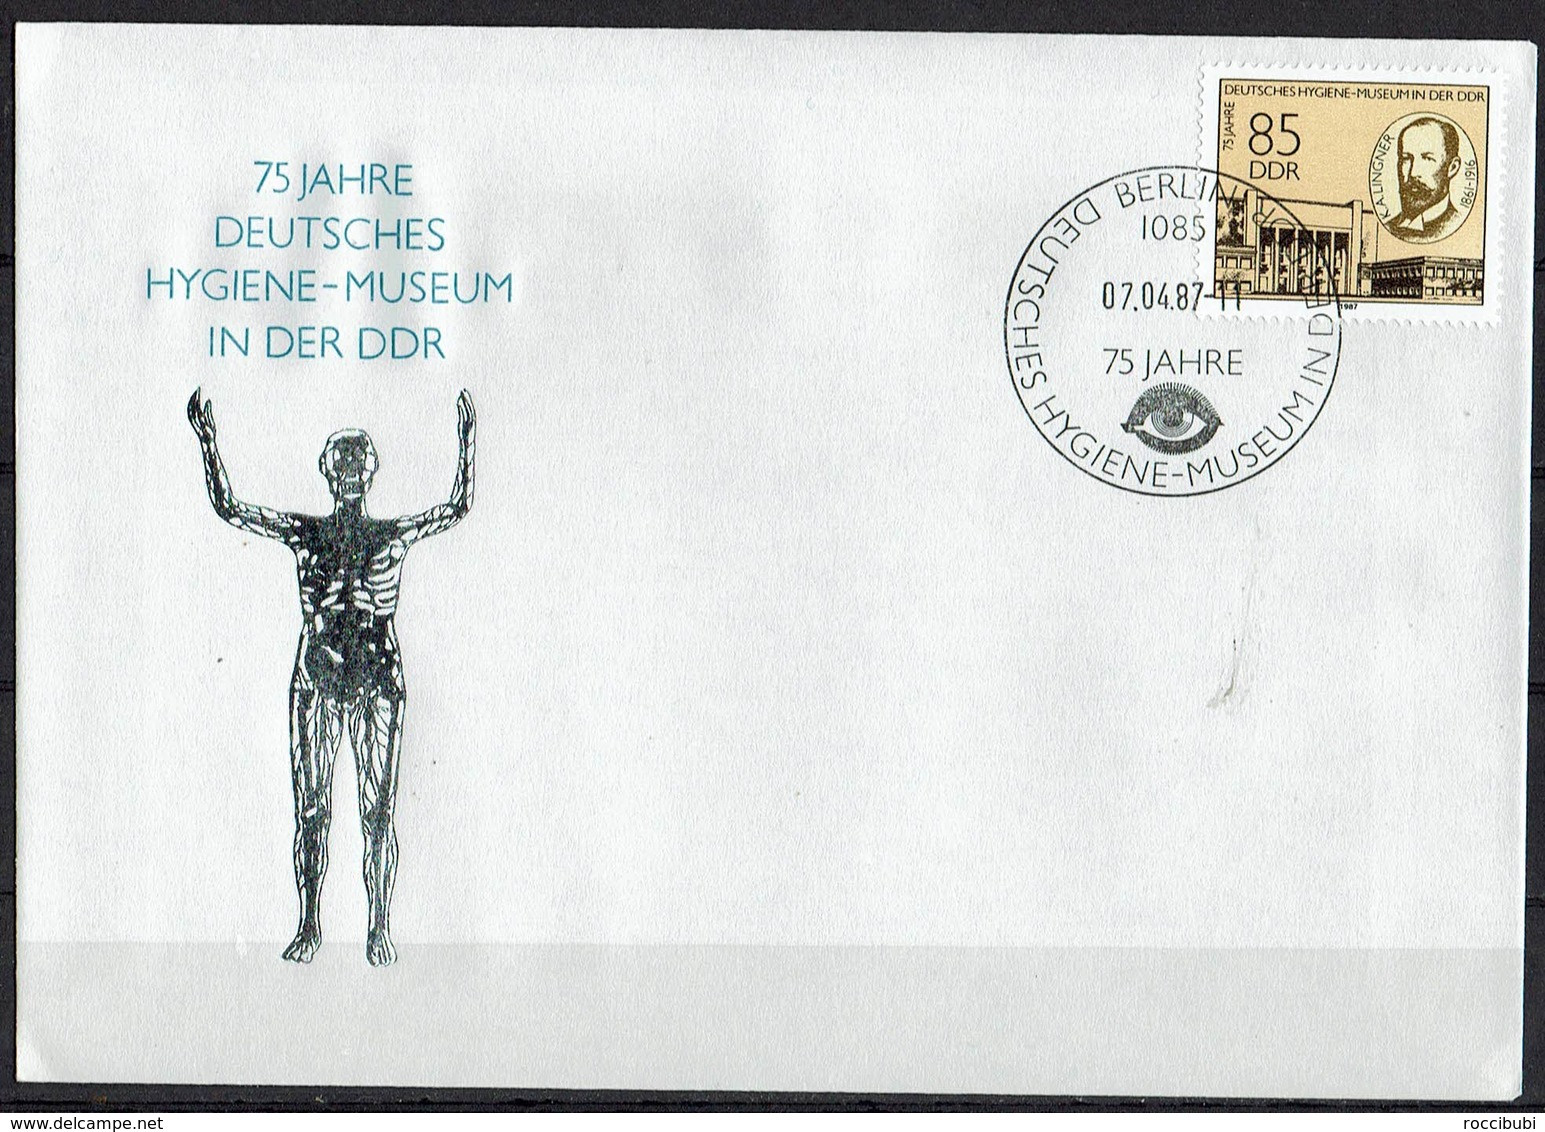 1987...3089 FDC - 1981-1990